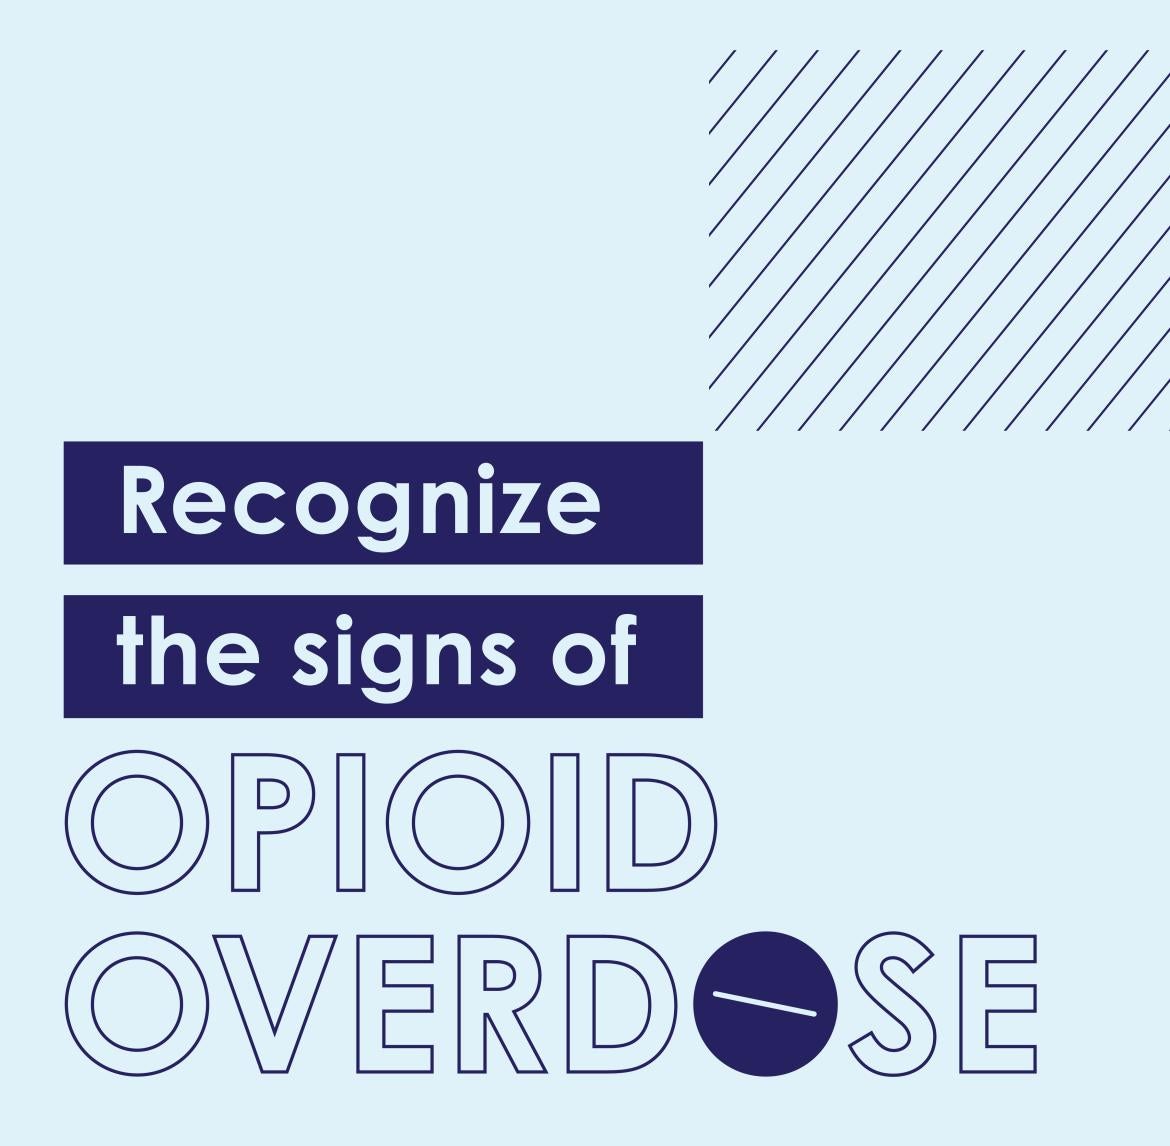 Recognizing the signs of overdose text